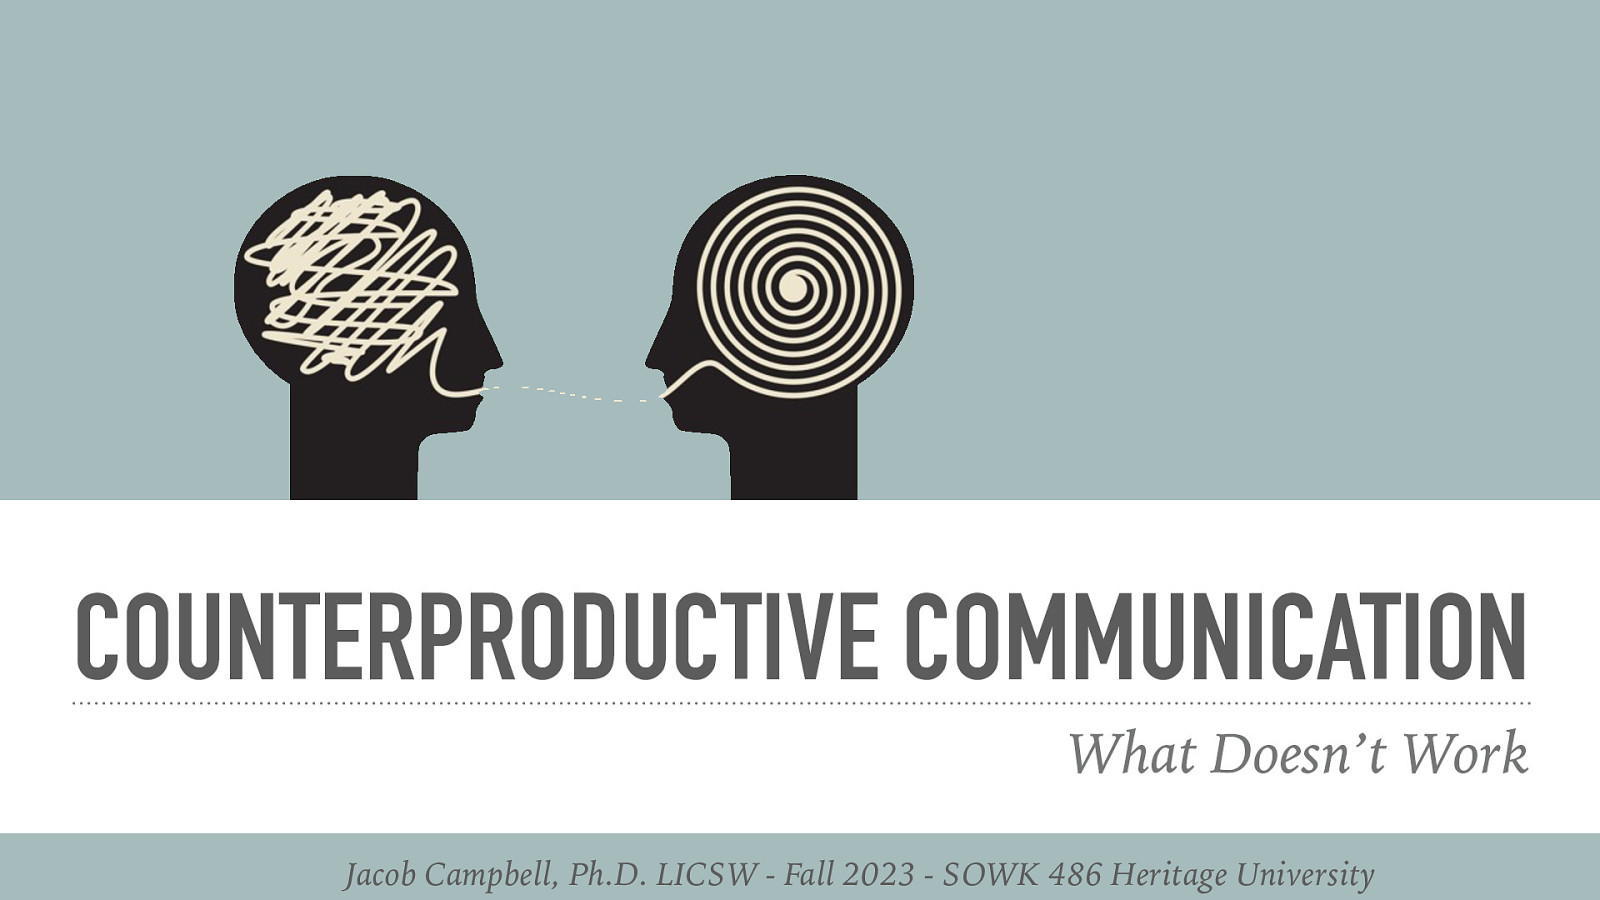 Fall 2023 SOWK 486w Week 07 - Counterproductive Communication by Jacob Campbell